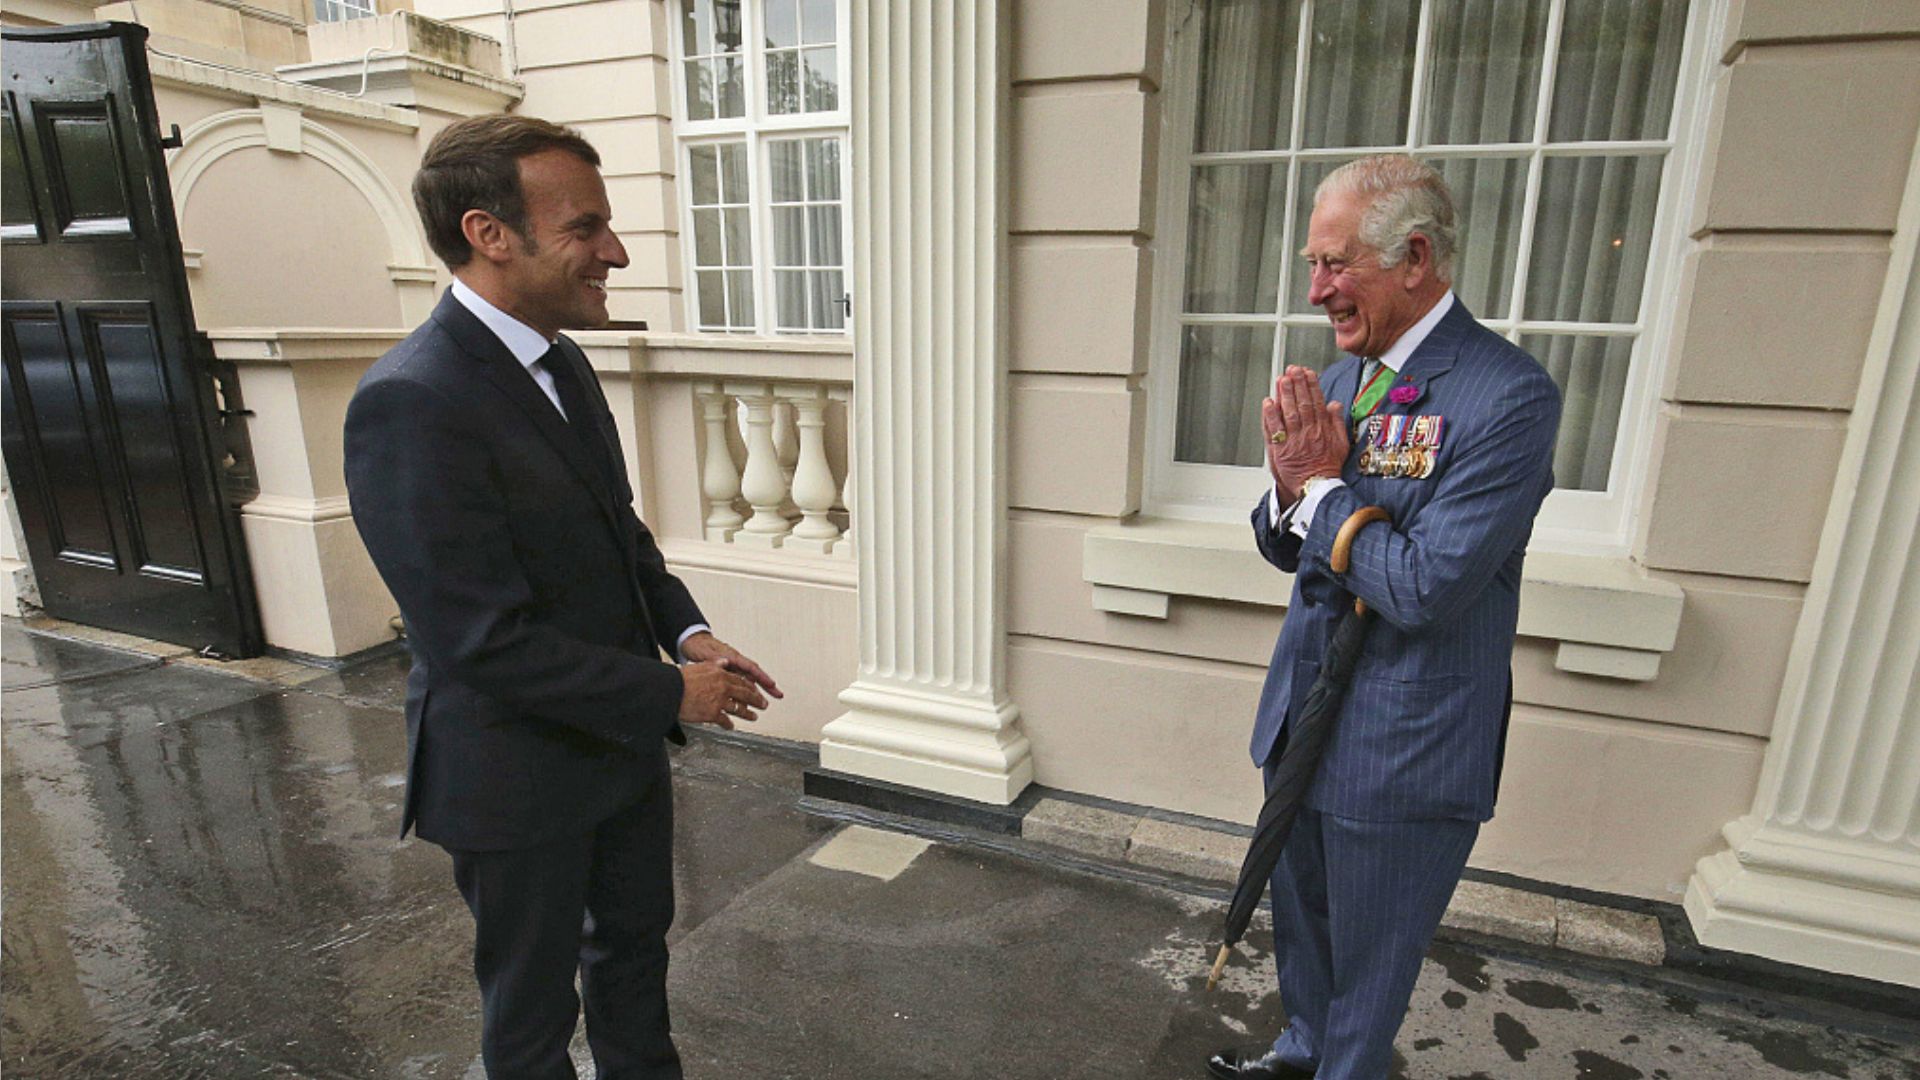 Praying for success: King Charles' state visit to France is a chance to rebvuild the damaged 'entente cordiale'. /Jonathan Brady/Pool/File